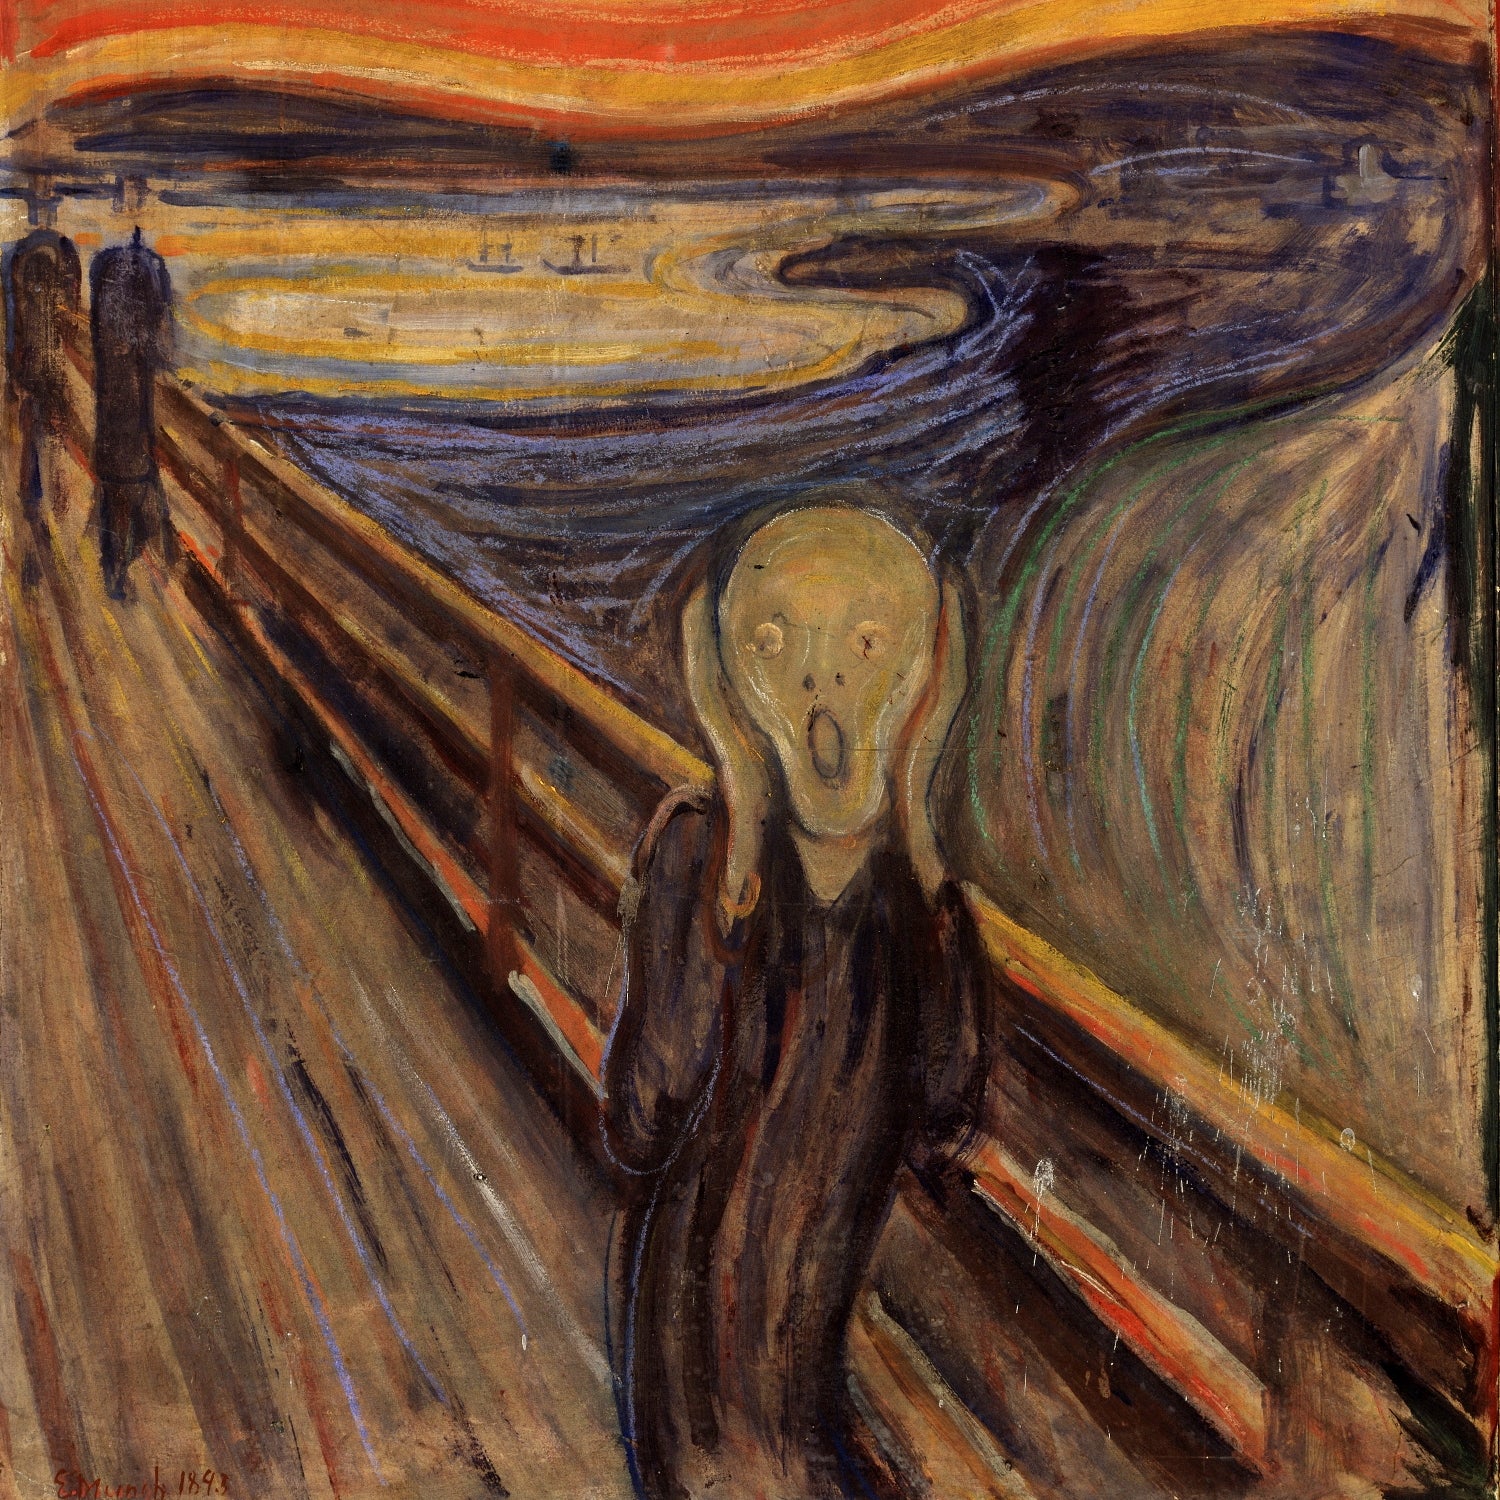 Gone In (Under) 60 Seconds: The 1994 theft of 'The Scream'